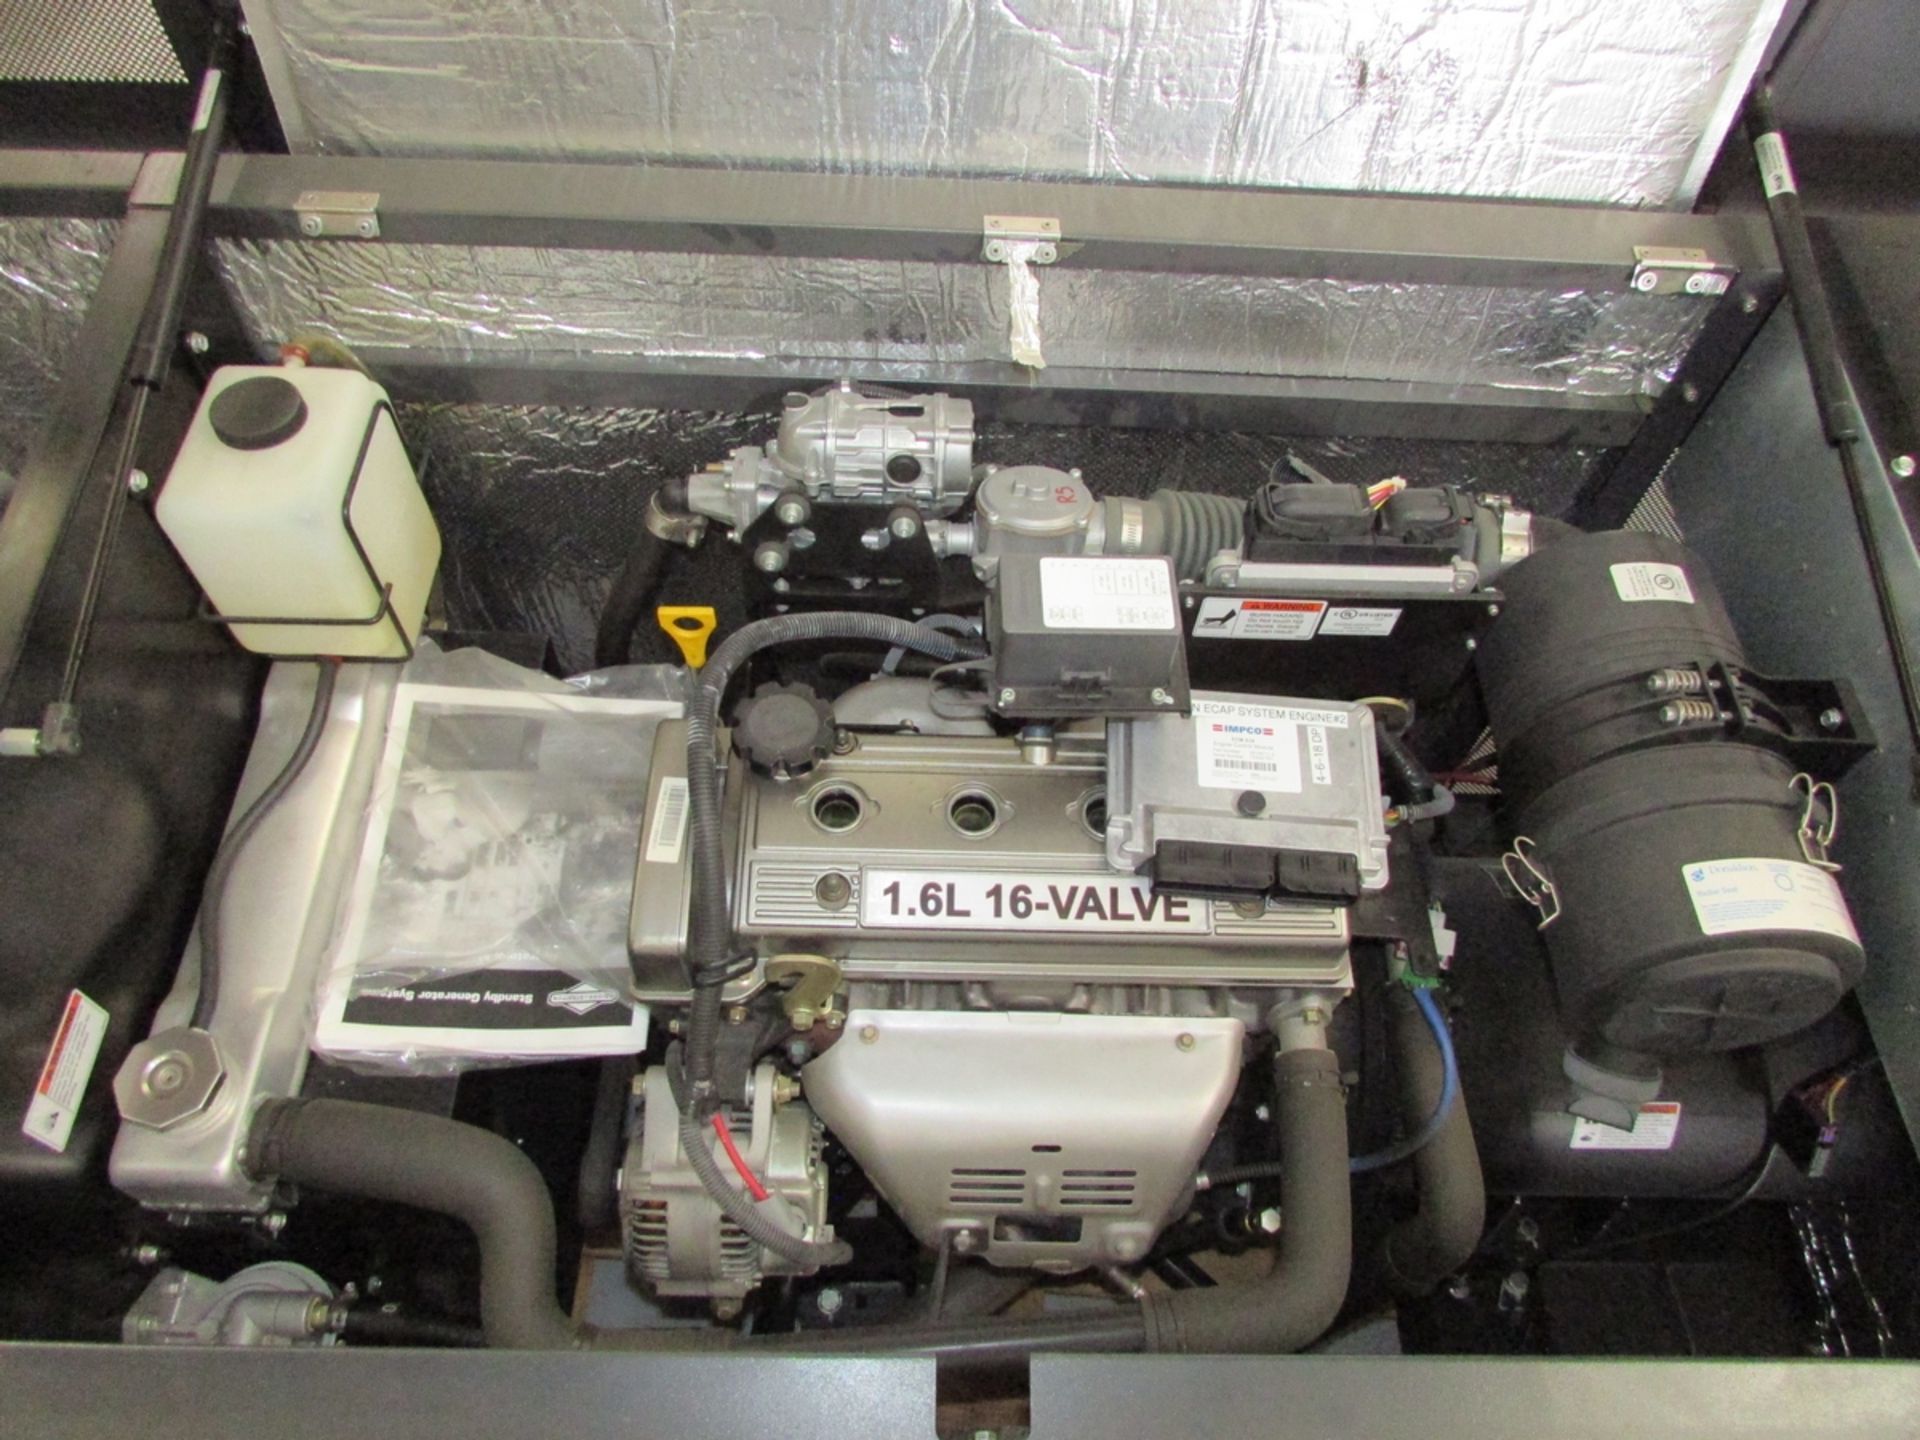 Briggs & Stratton 25-BSPP2-0 25Kw CNG/LPG Standby Generator (2013) - Image 7 of 36